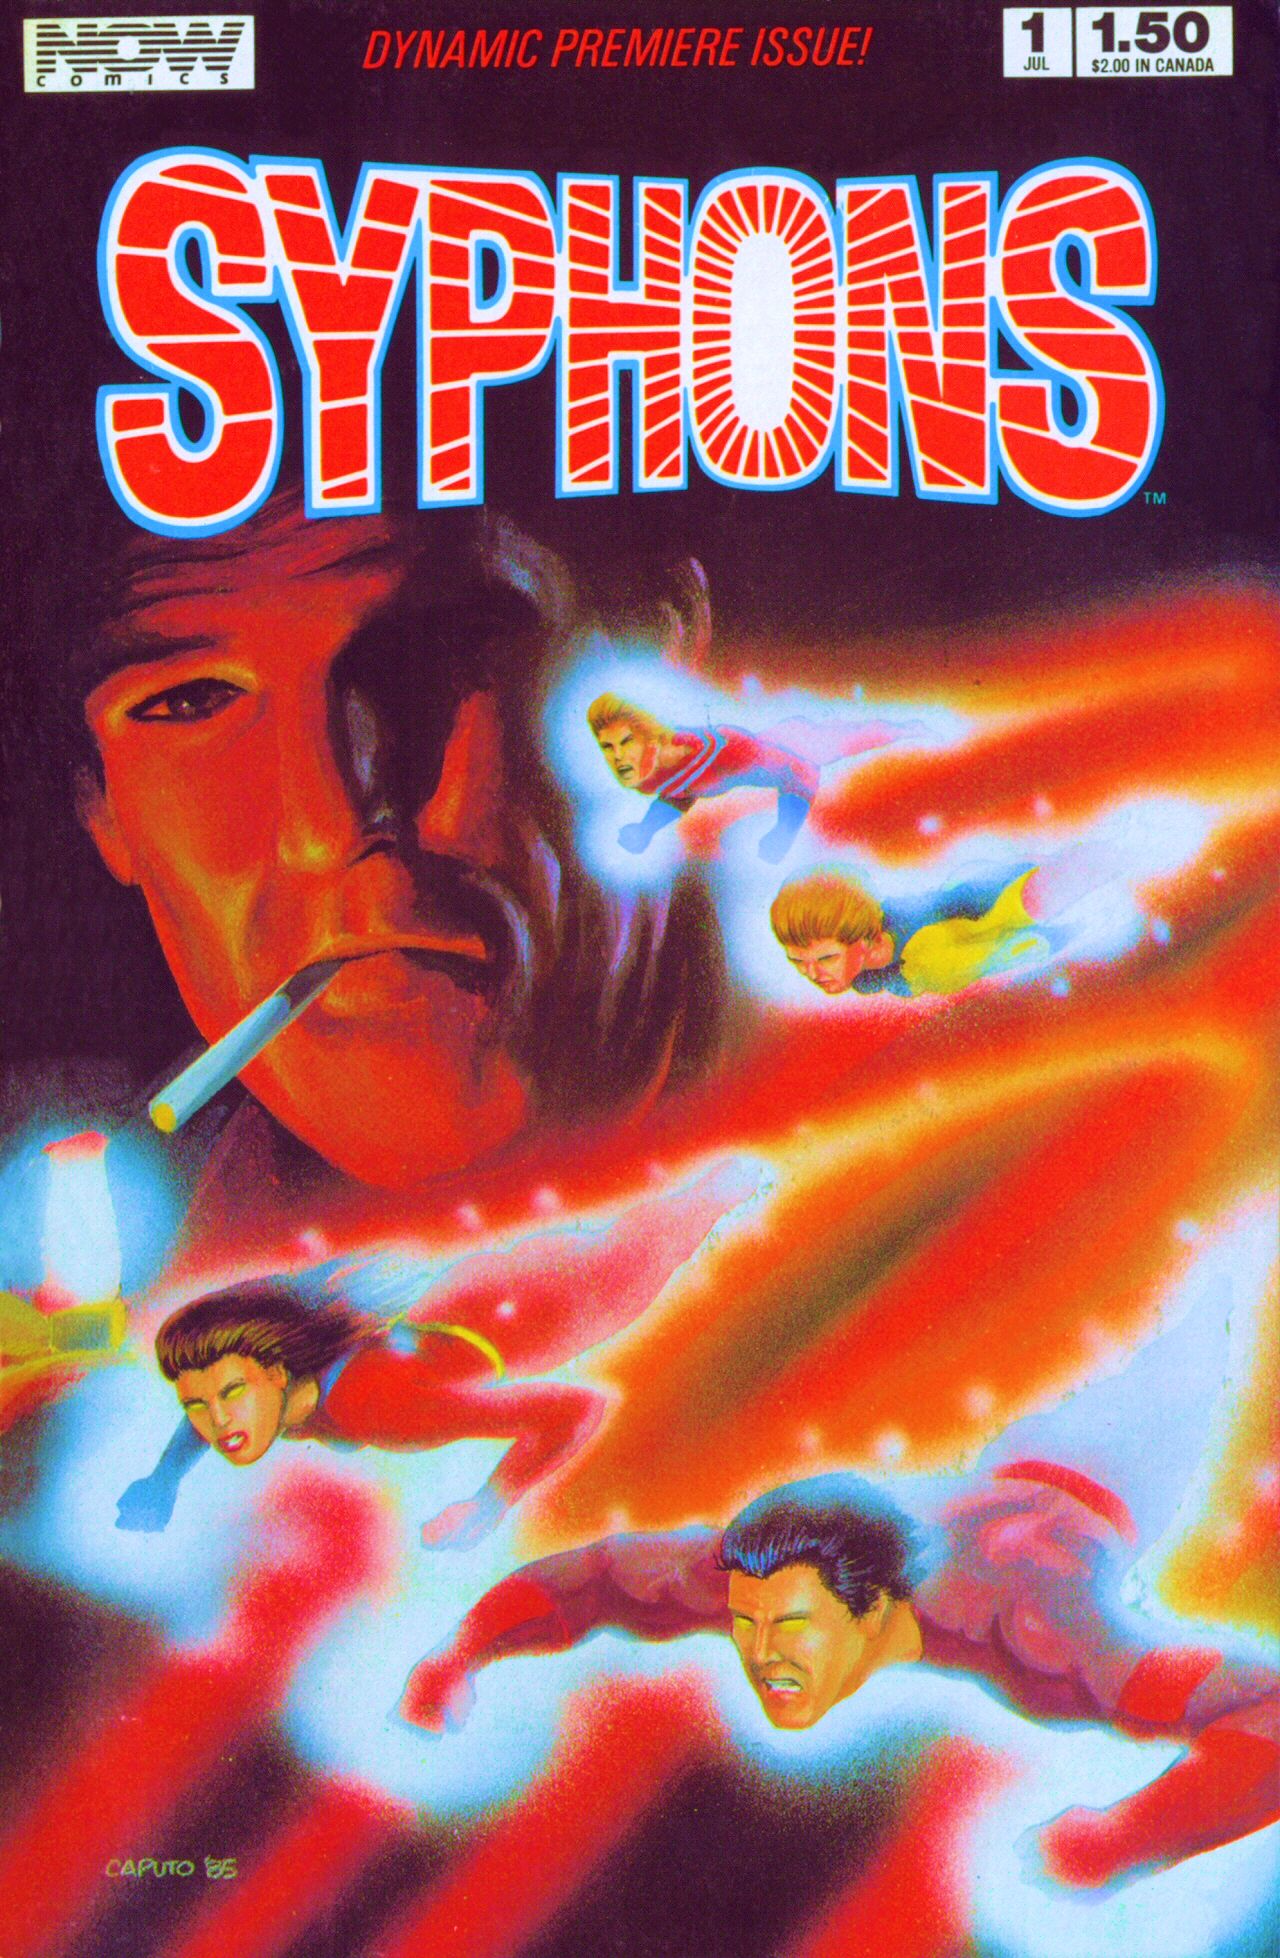 Read online Syphons comic -  Issue #1 - 1